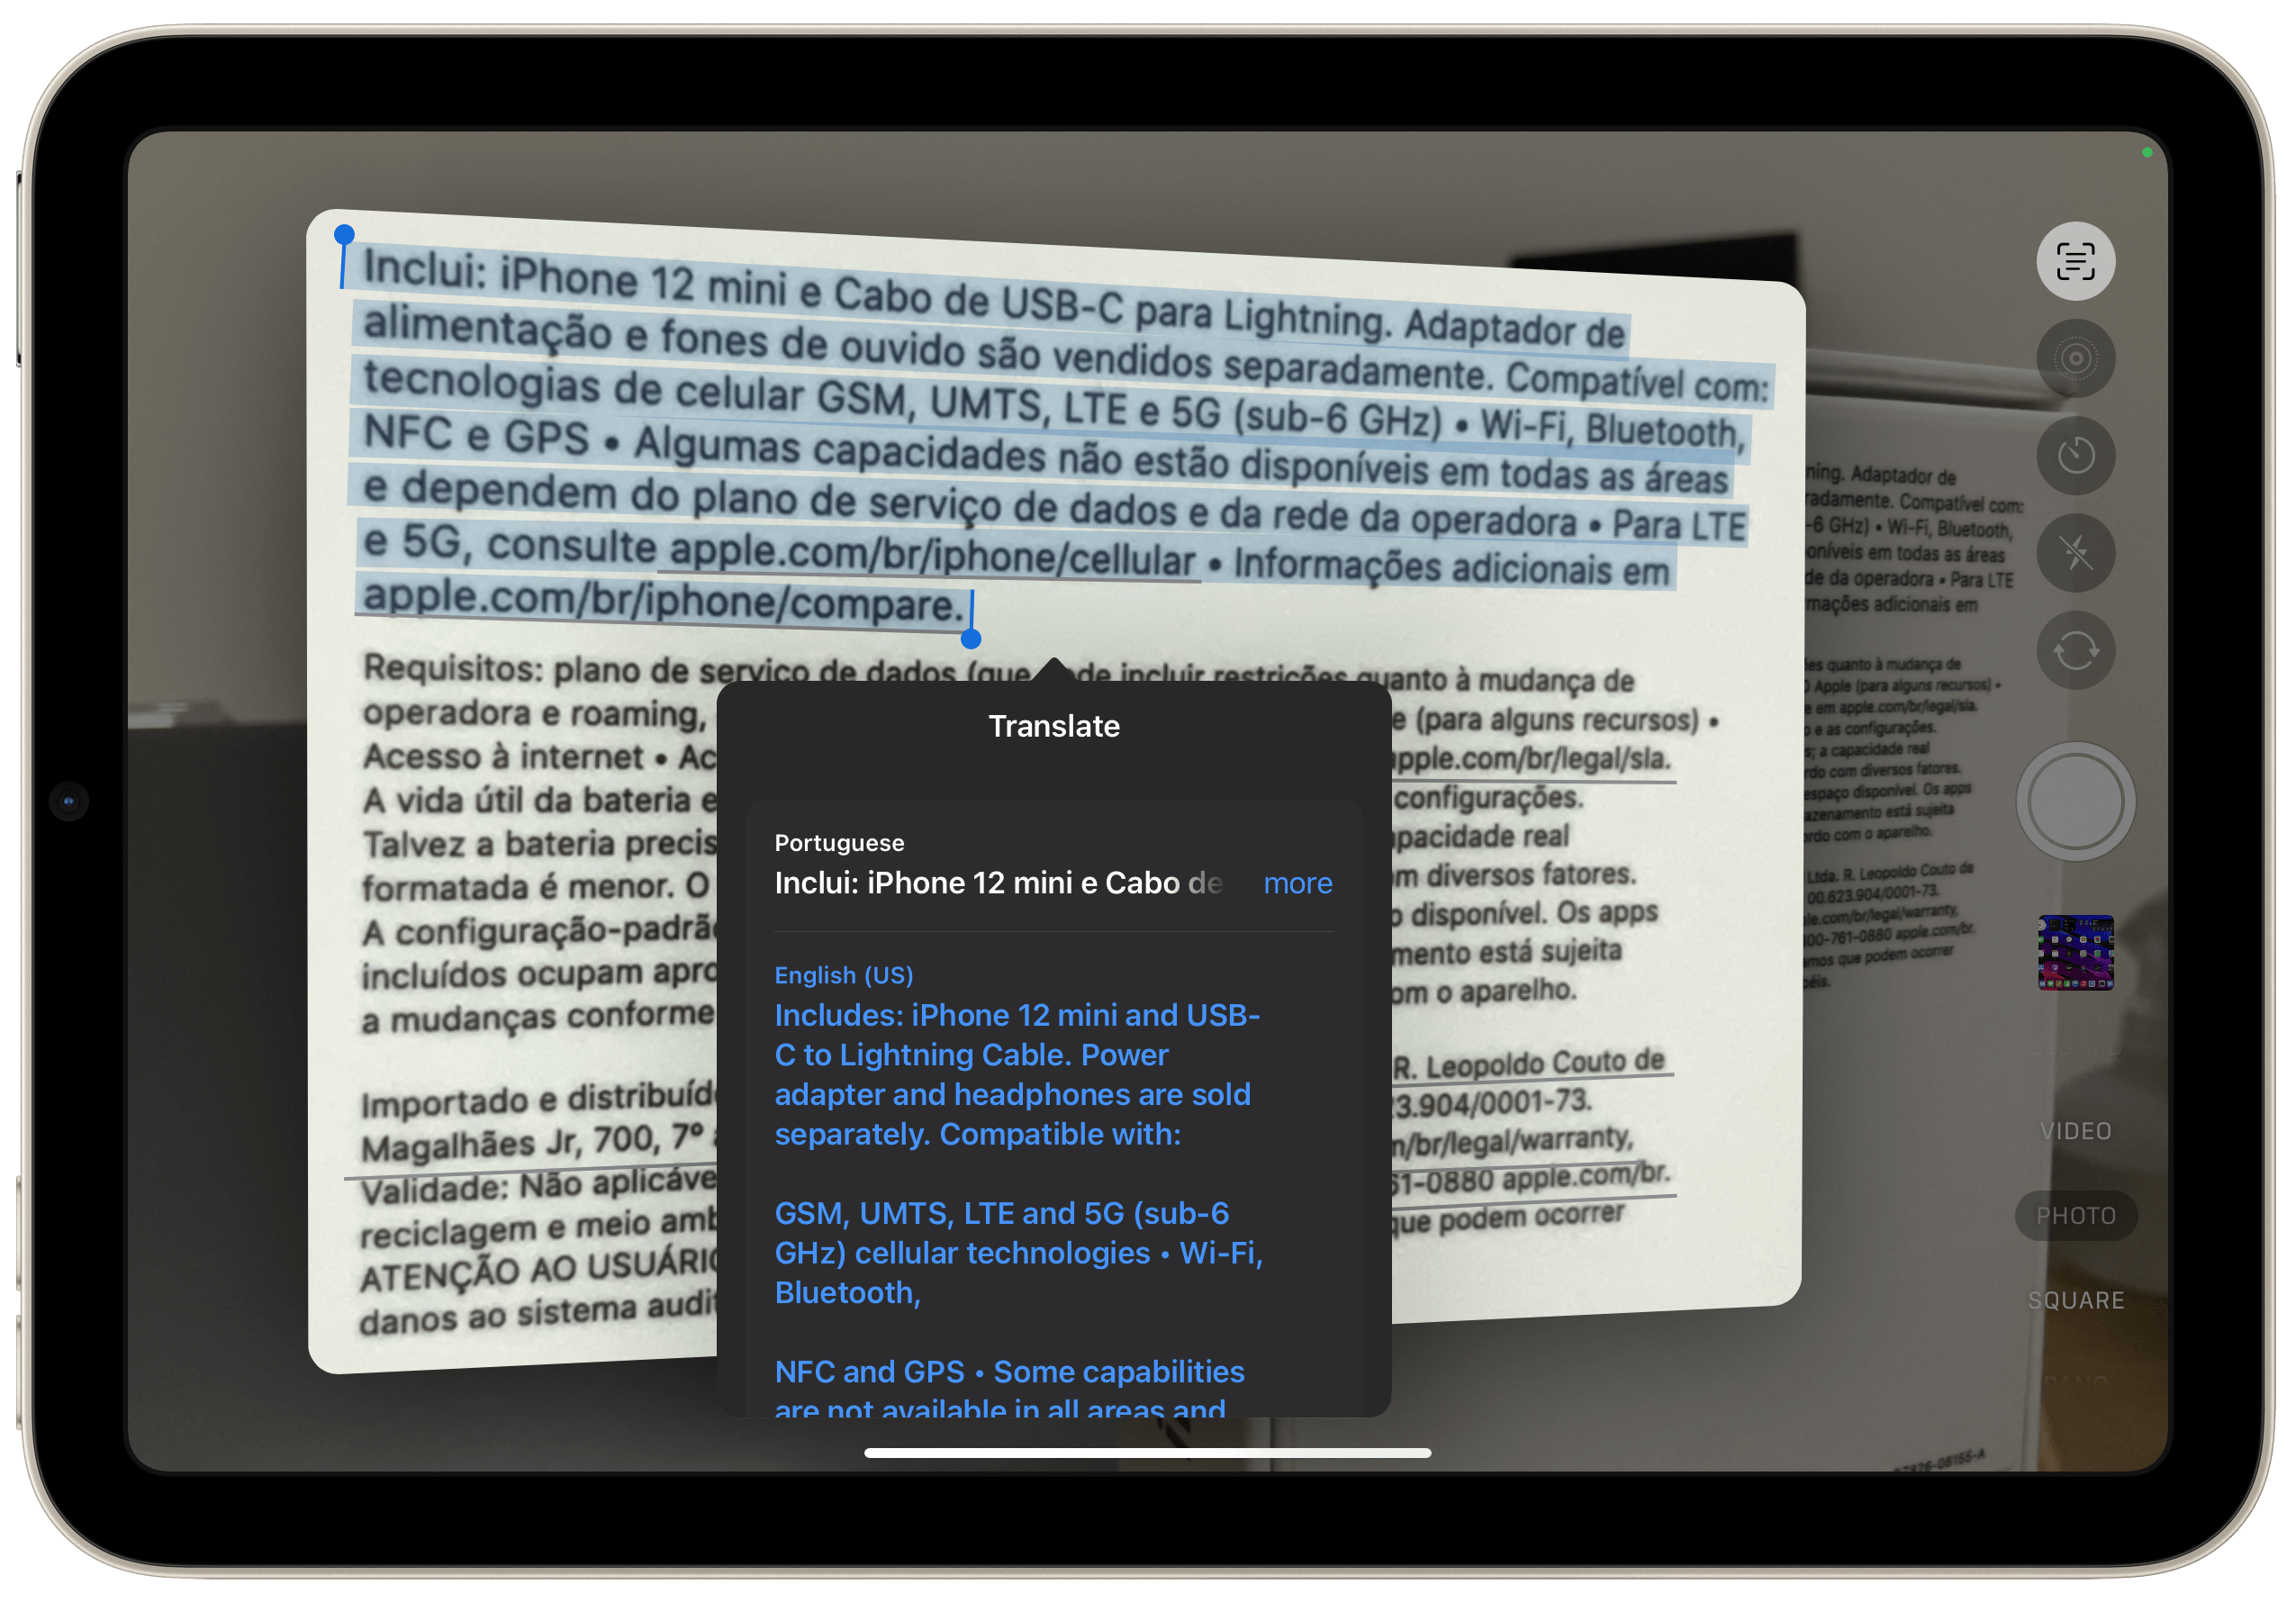 How to translate text using the camera on your iPad with iPadOS 16